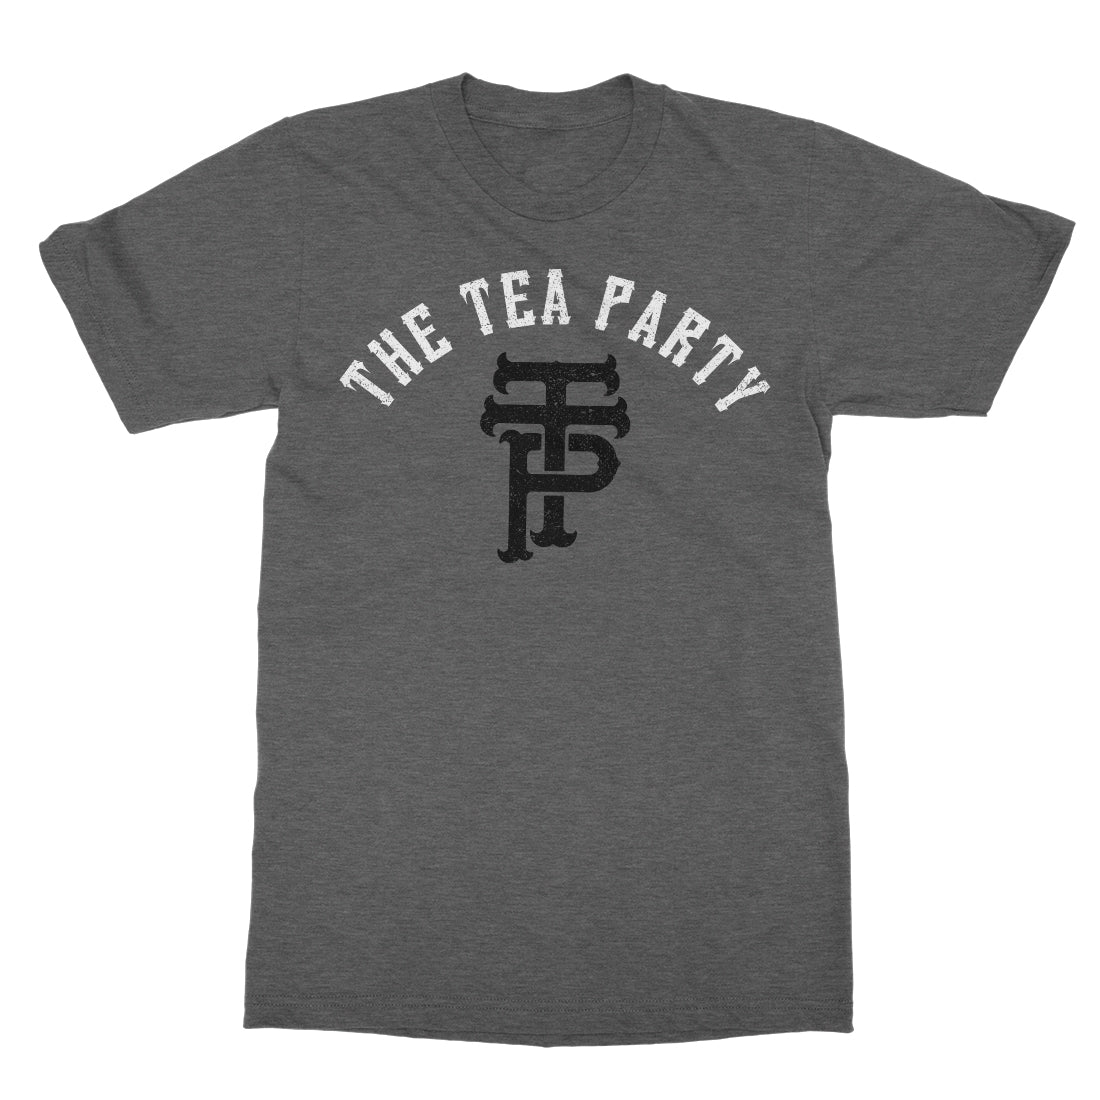 The Tea Party - TTP - Heather Charcoal Tee